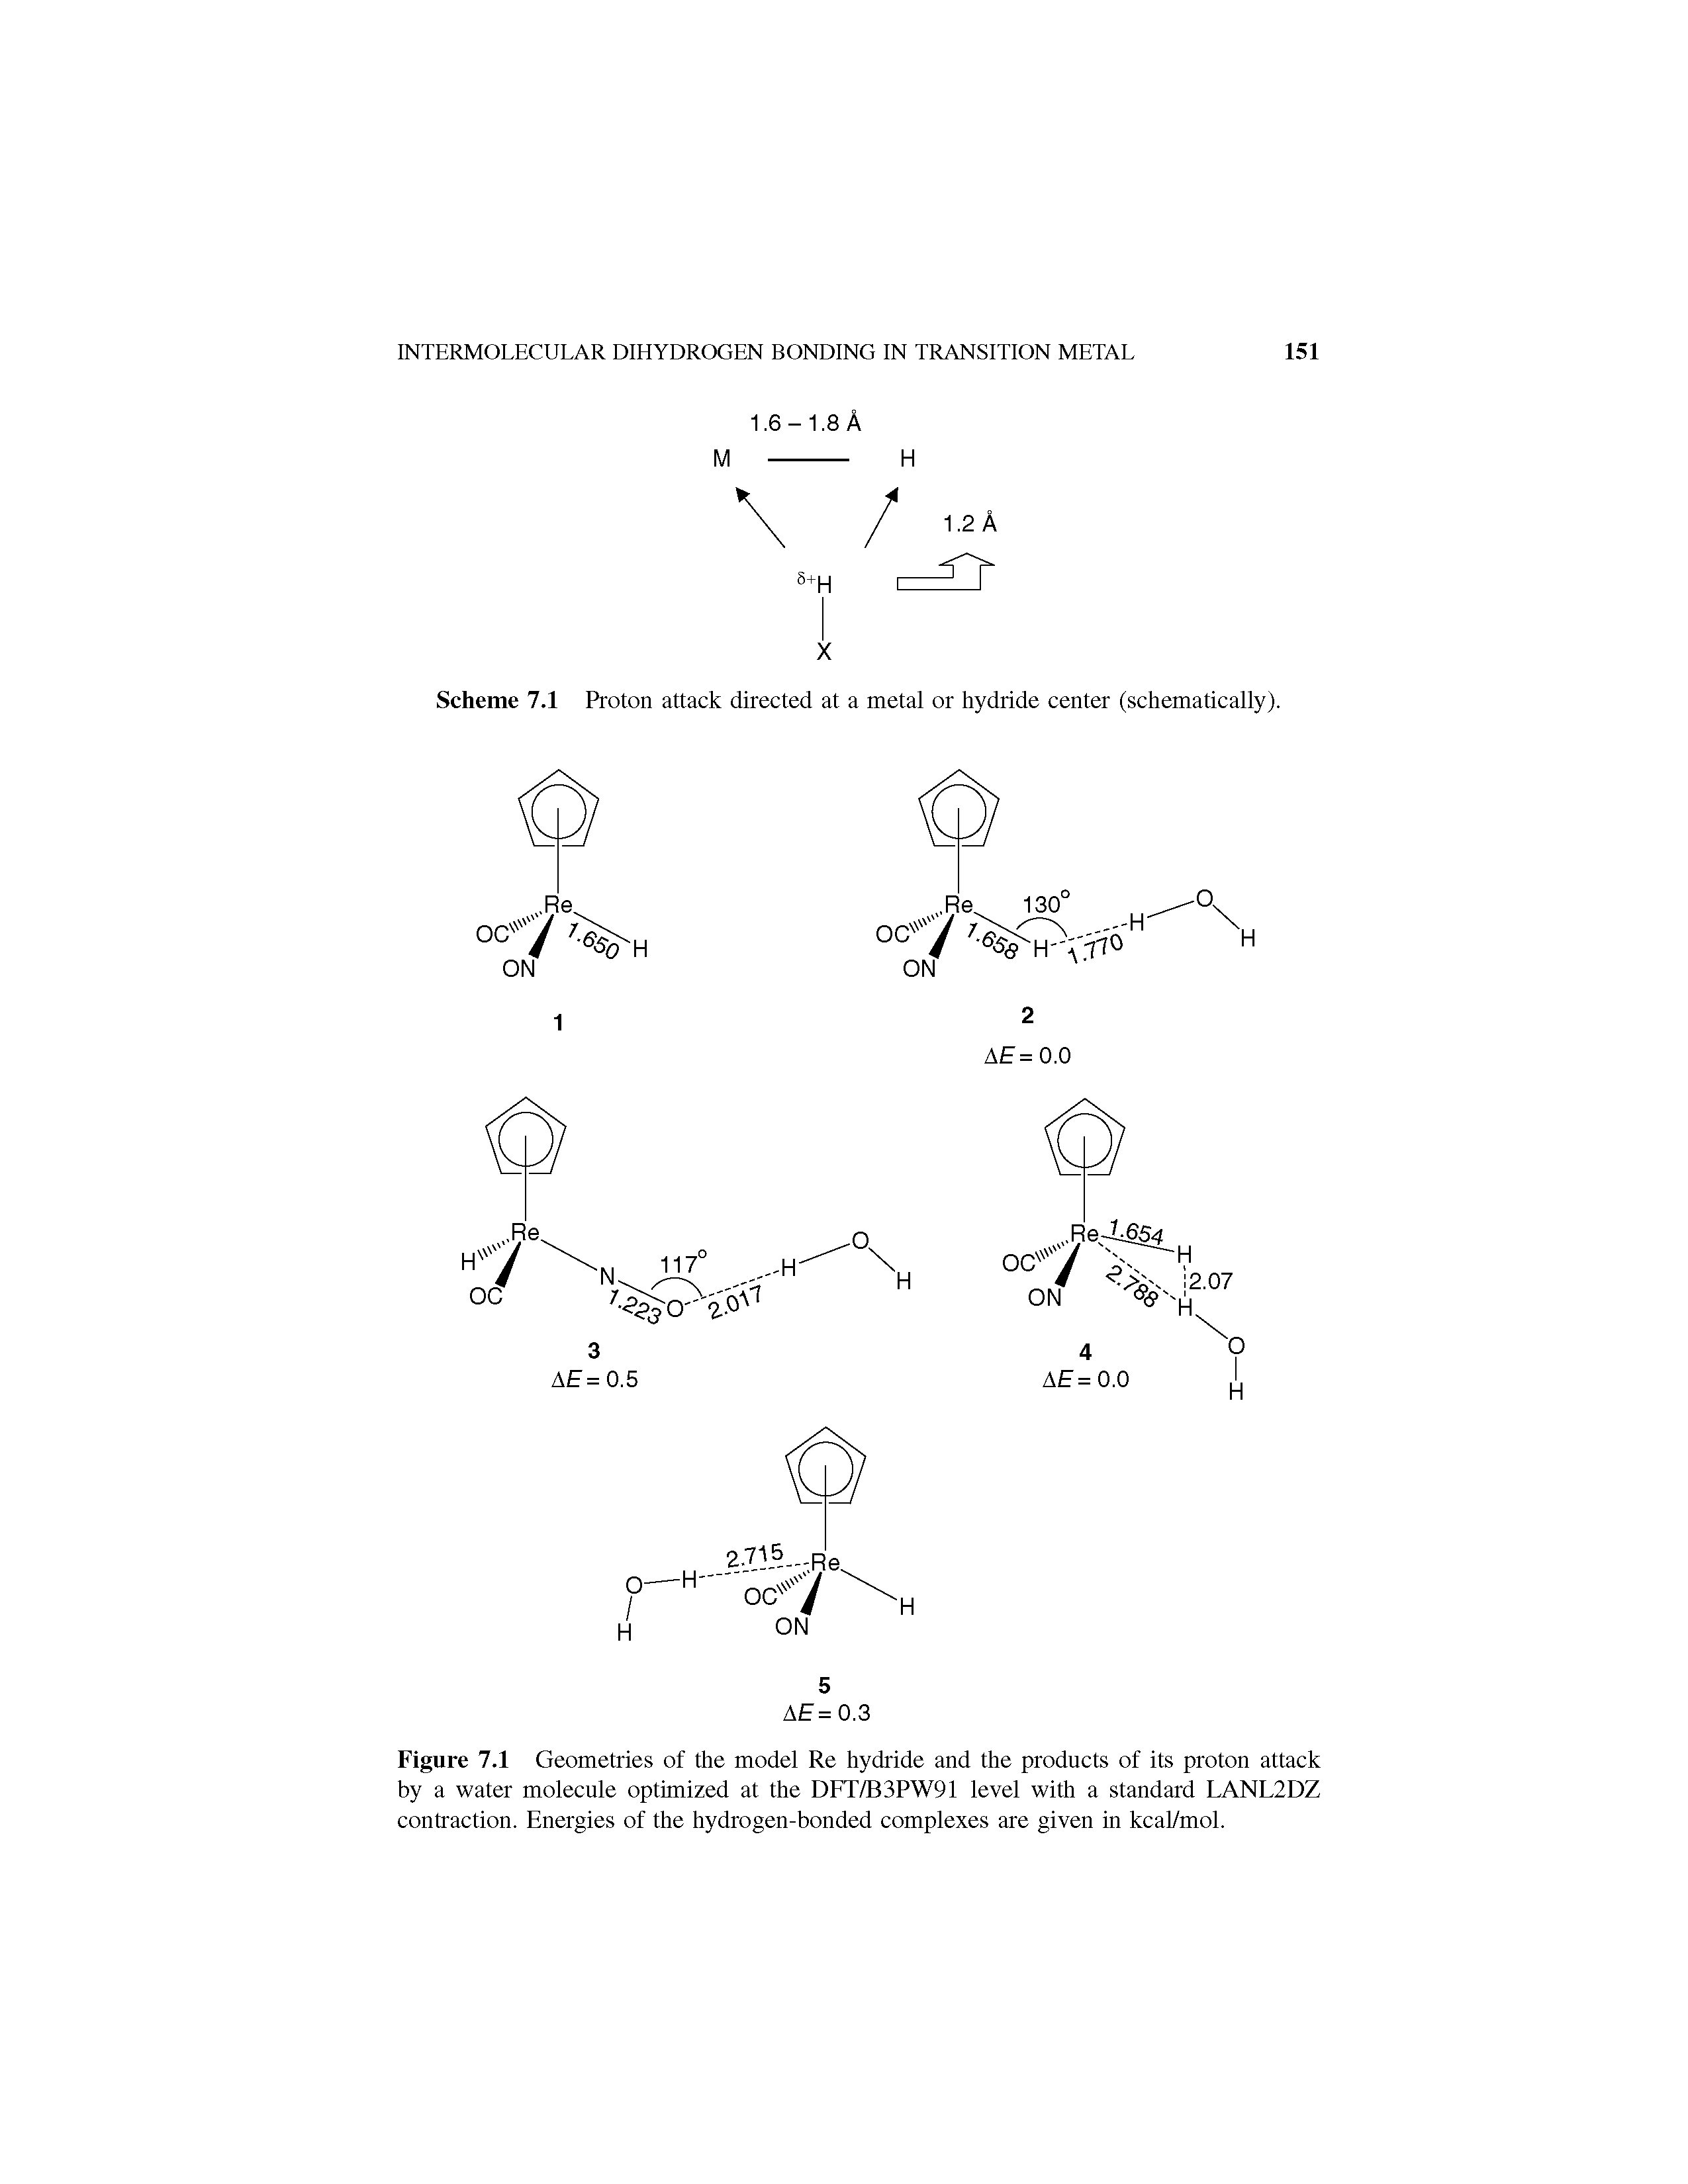 Figure 7.1 Geometries of the model Re hydride and the products of its proton attack by a water molecule optimized at the DFT/B3PW91 level with a standard LANL2DZ contraction. Energies of the hydrogen-bonded complexes are given in kcaPmol.